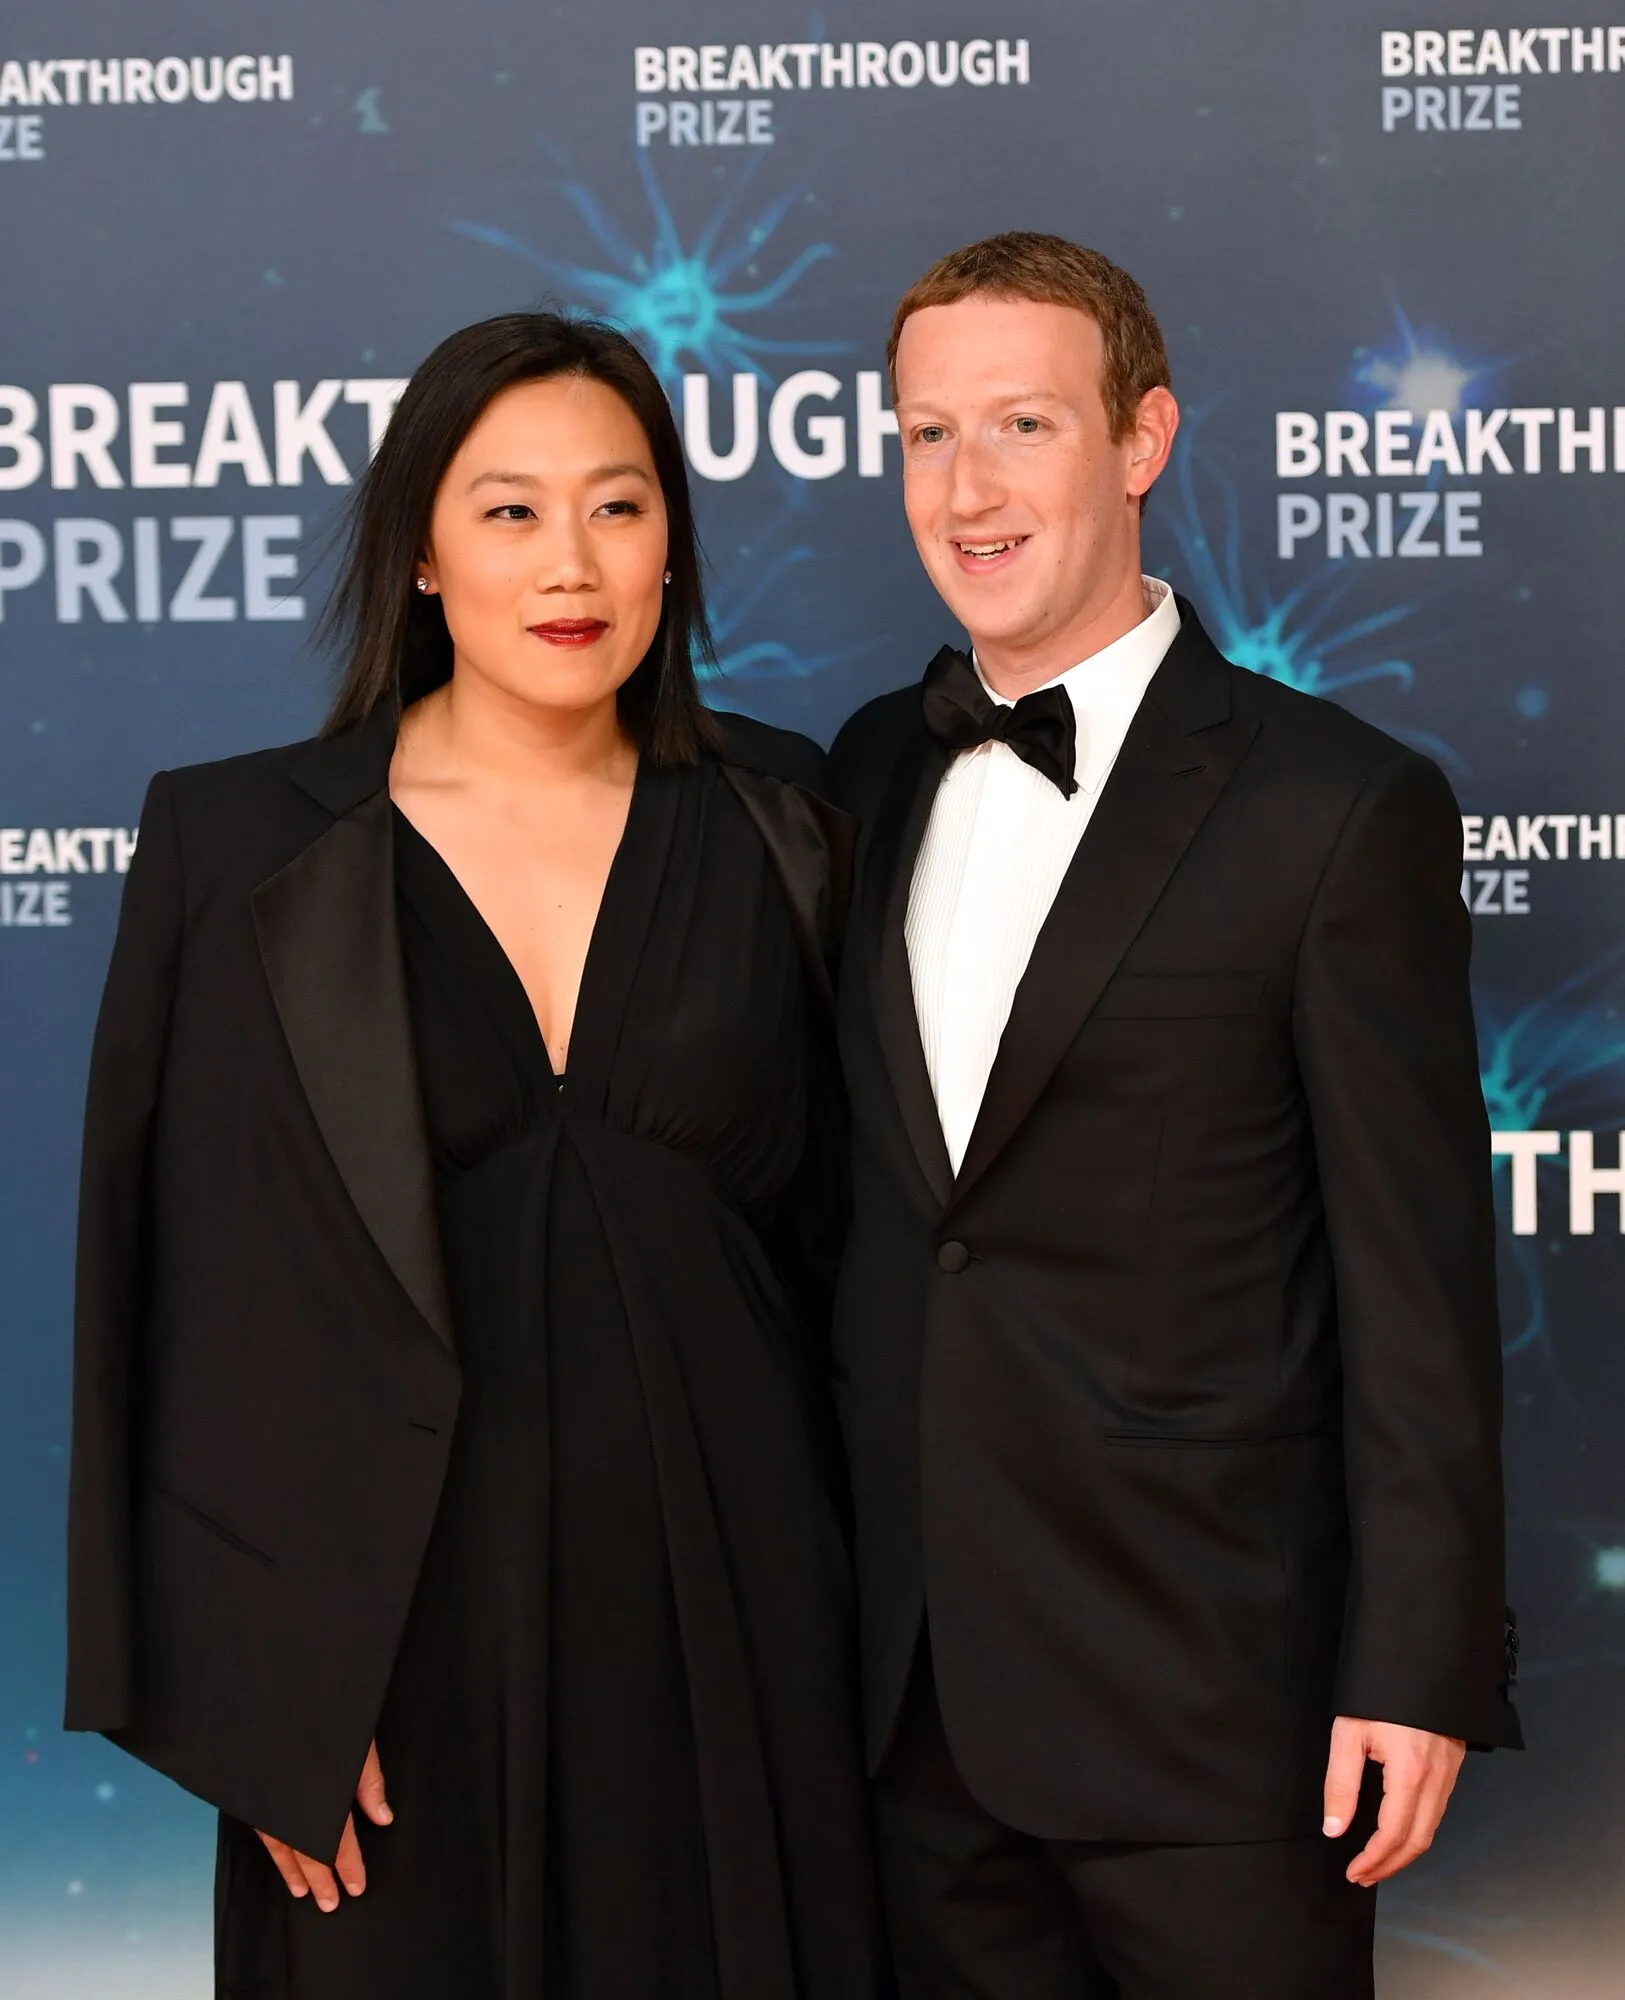 Mark Zuckerberg with a stylish beard caused a violent reaction on the network: the founder of Facebook and his wife reacted